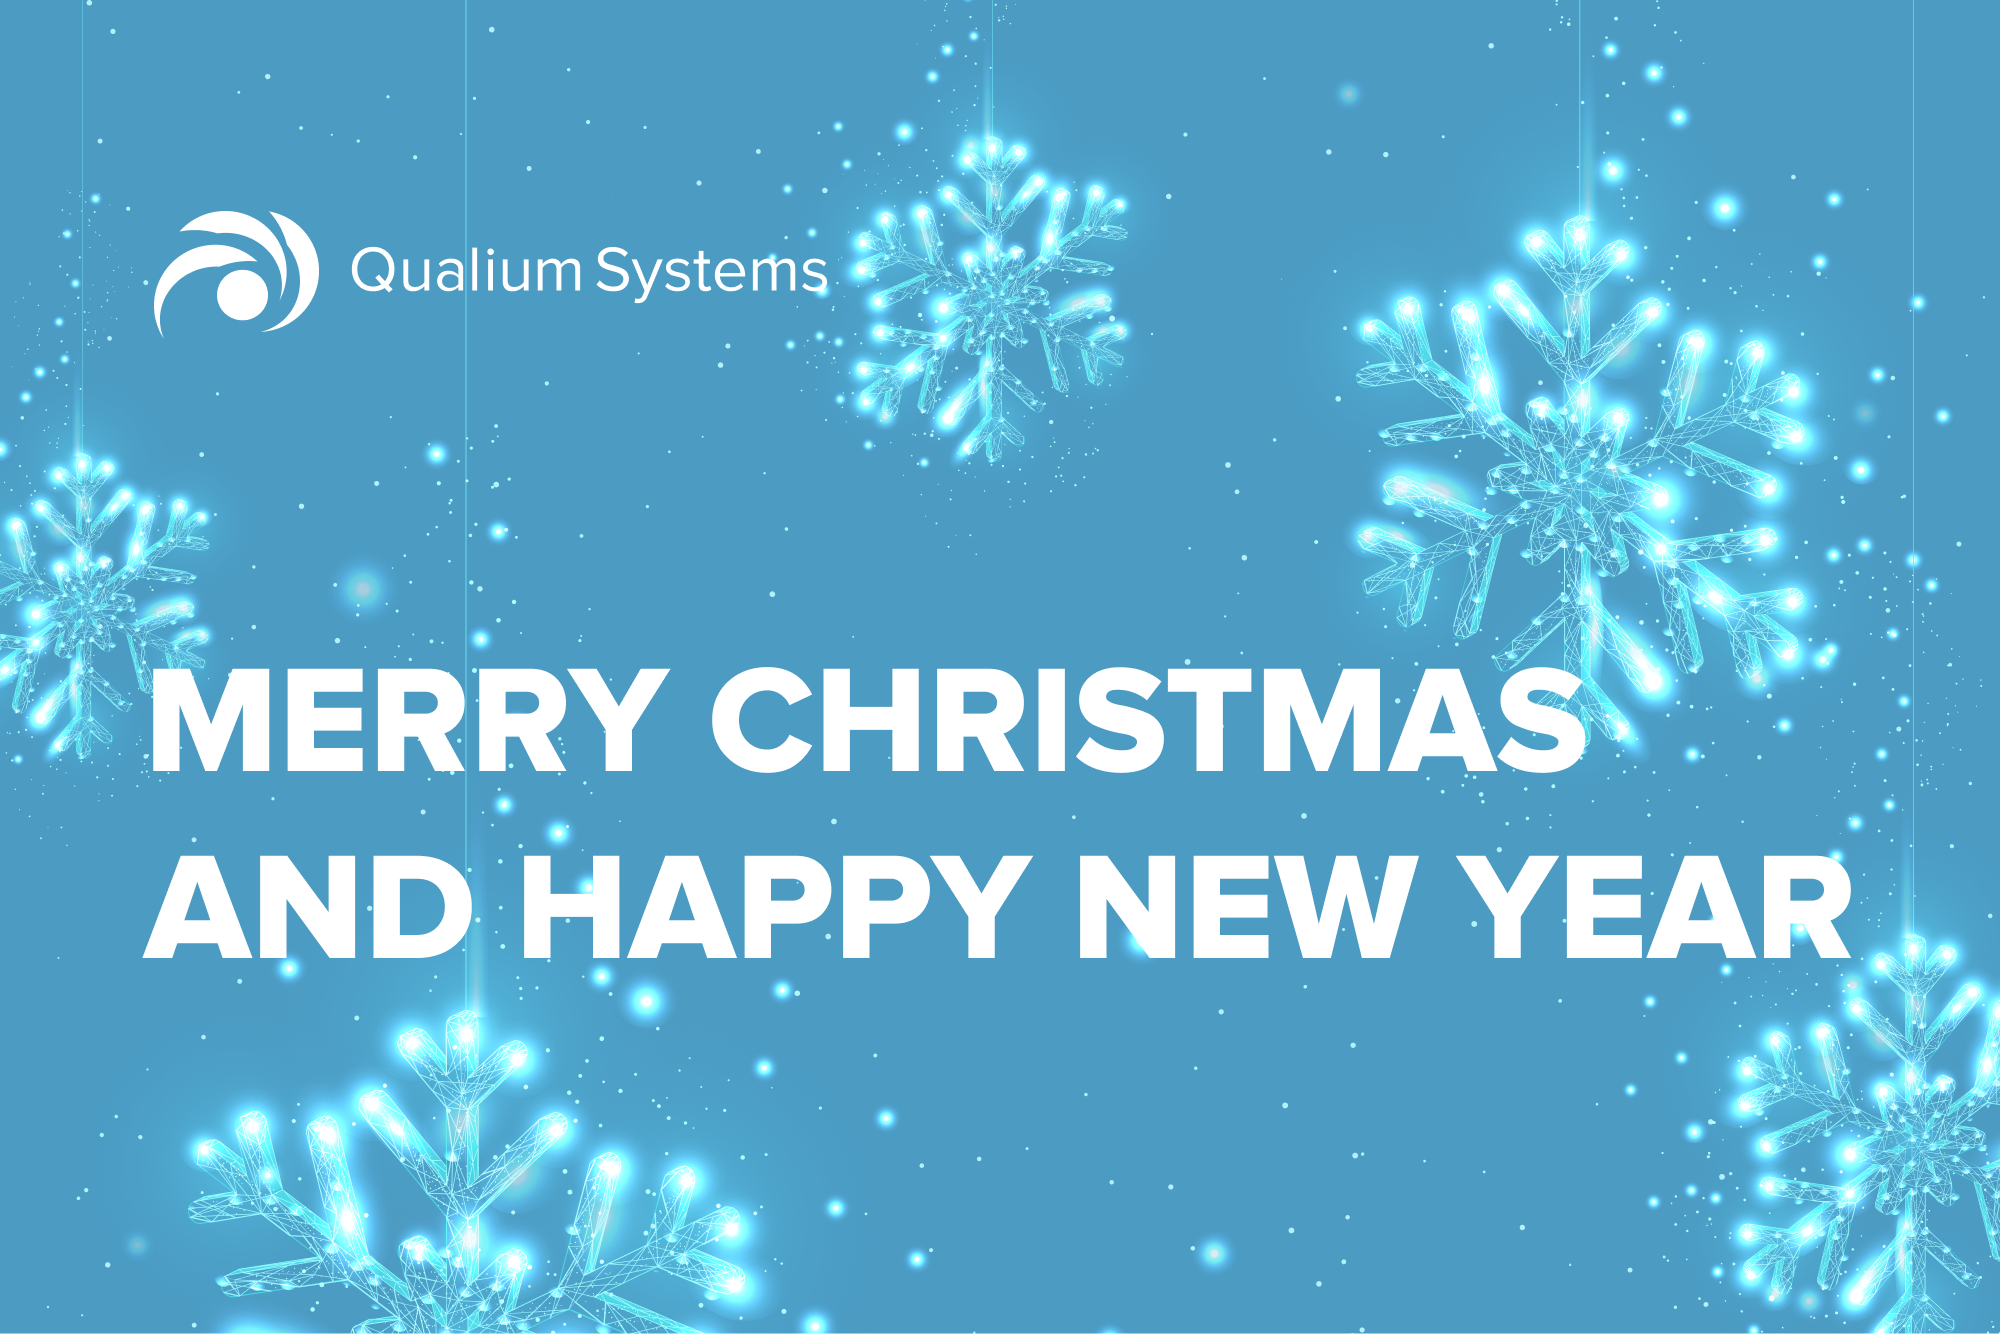 We wish you a Merry Christmas and a Happy New Year